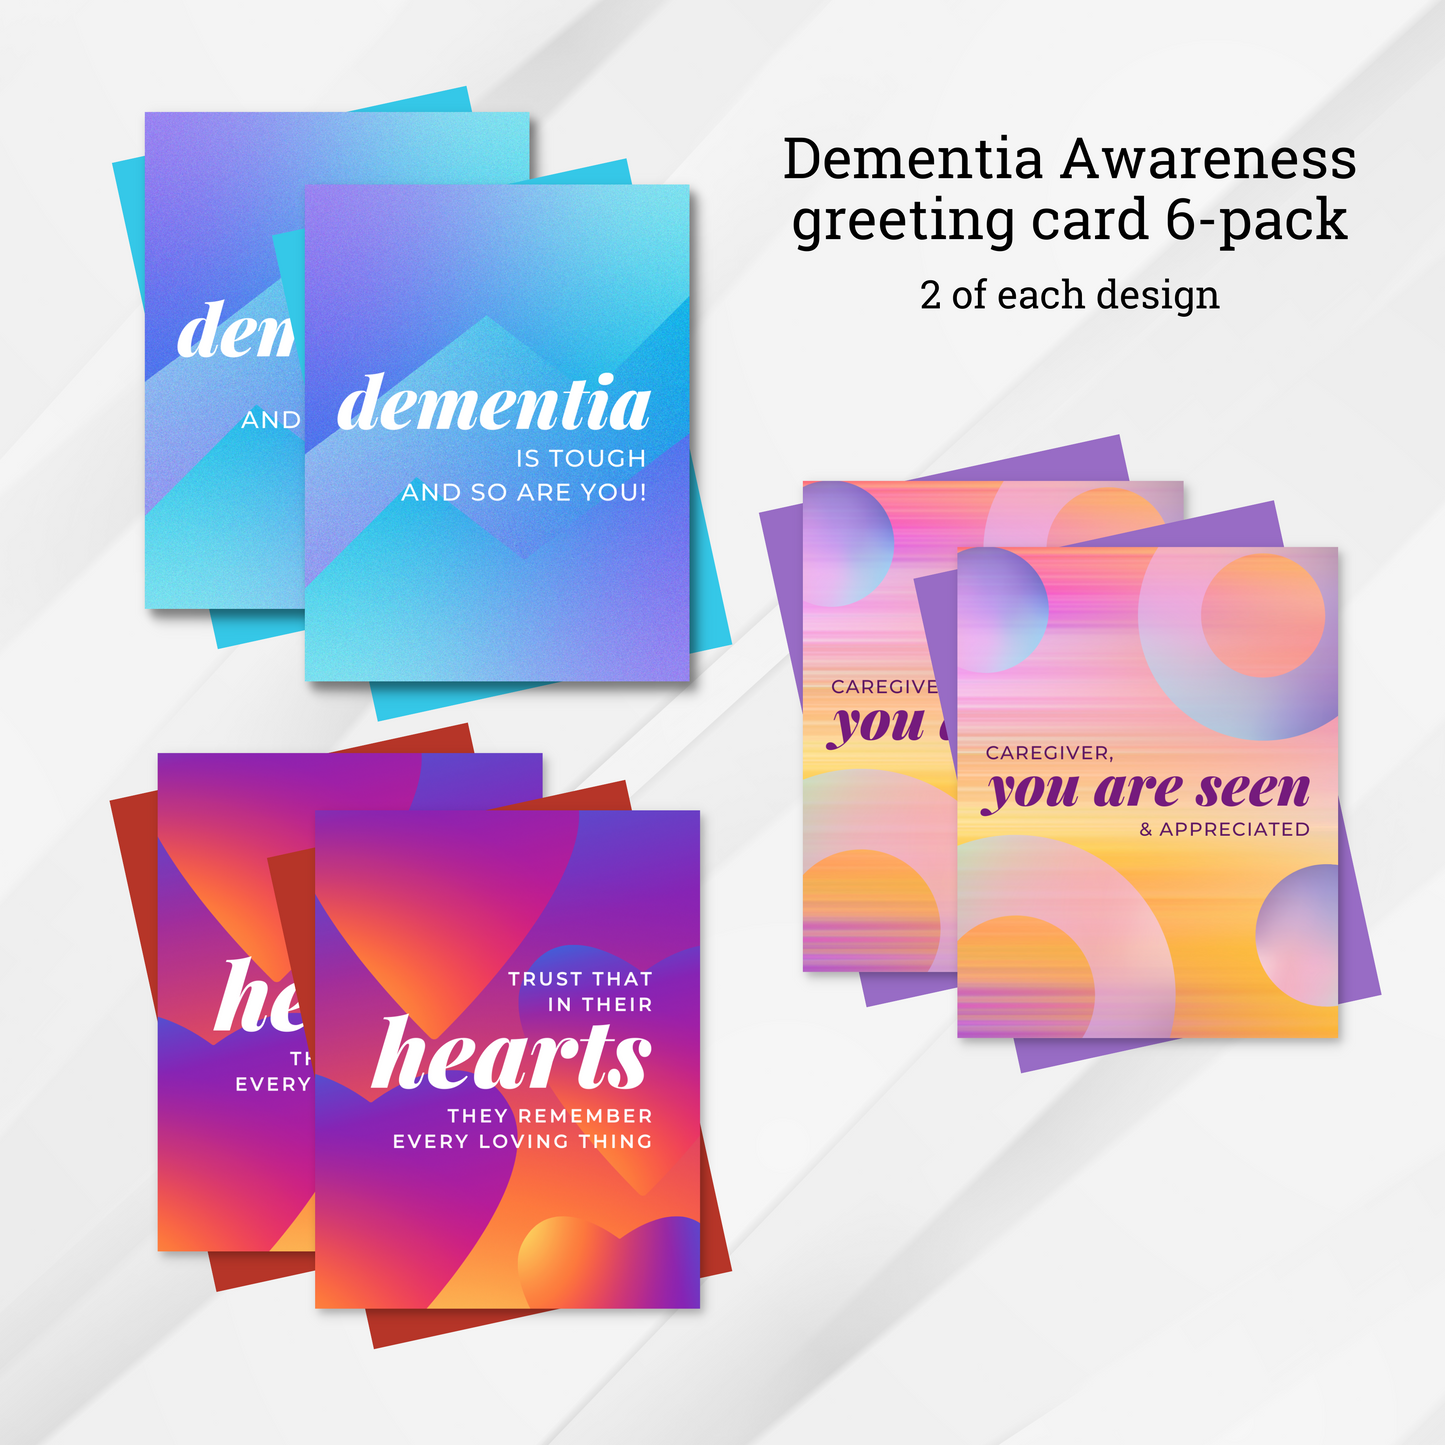 Dementia is tough and so are you, Dementia awareness card